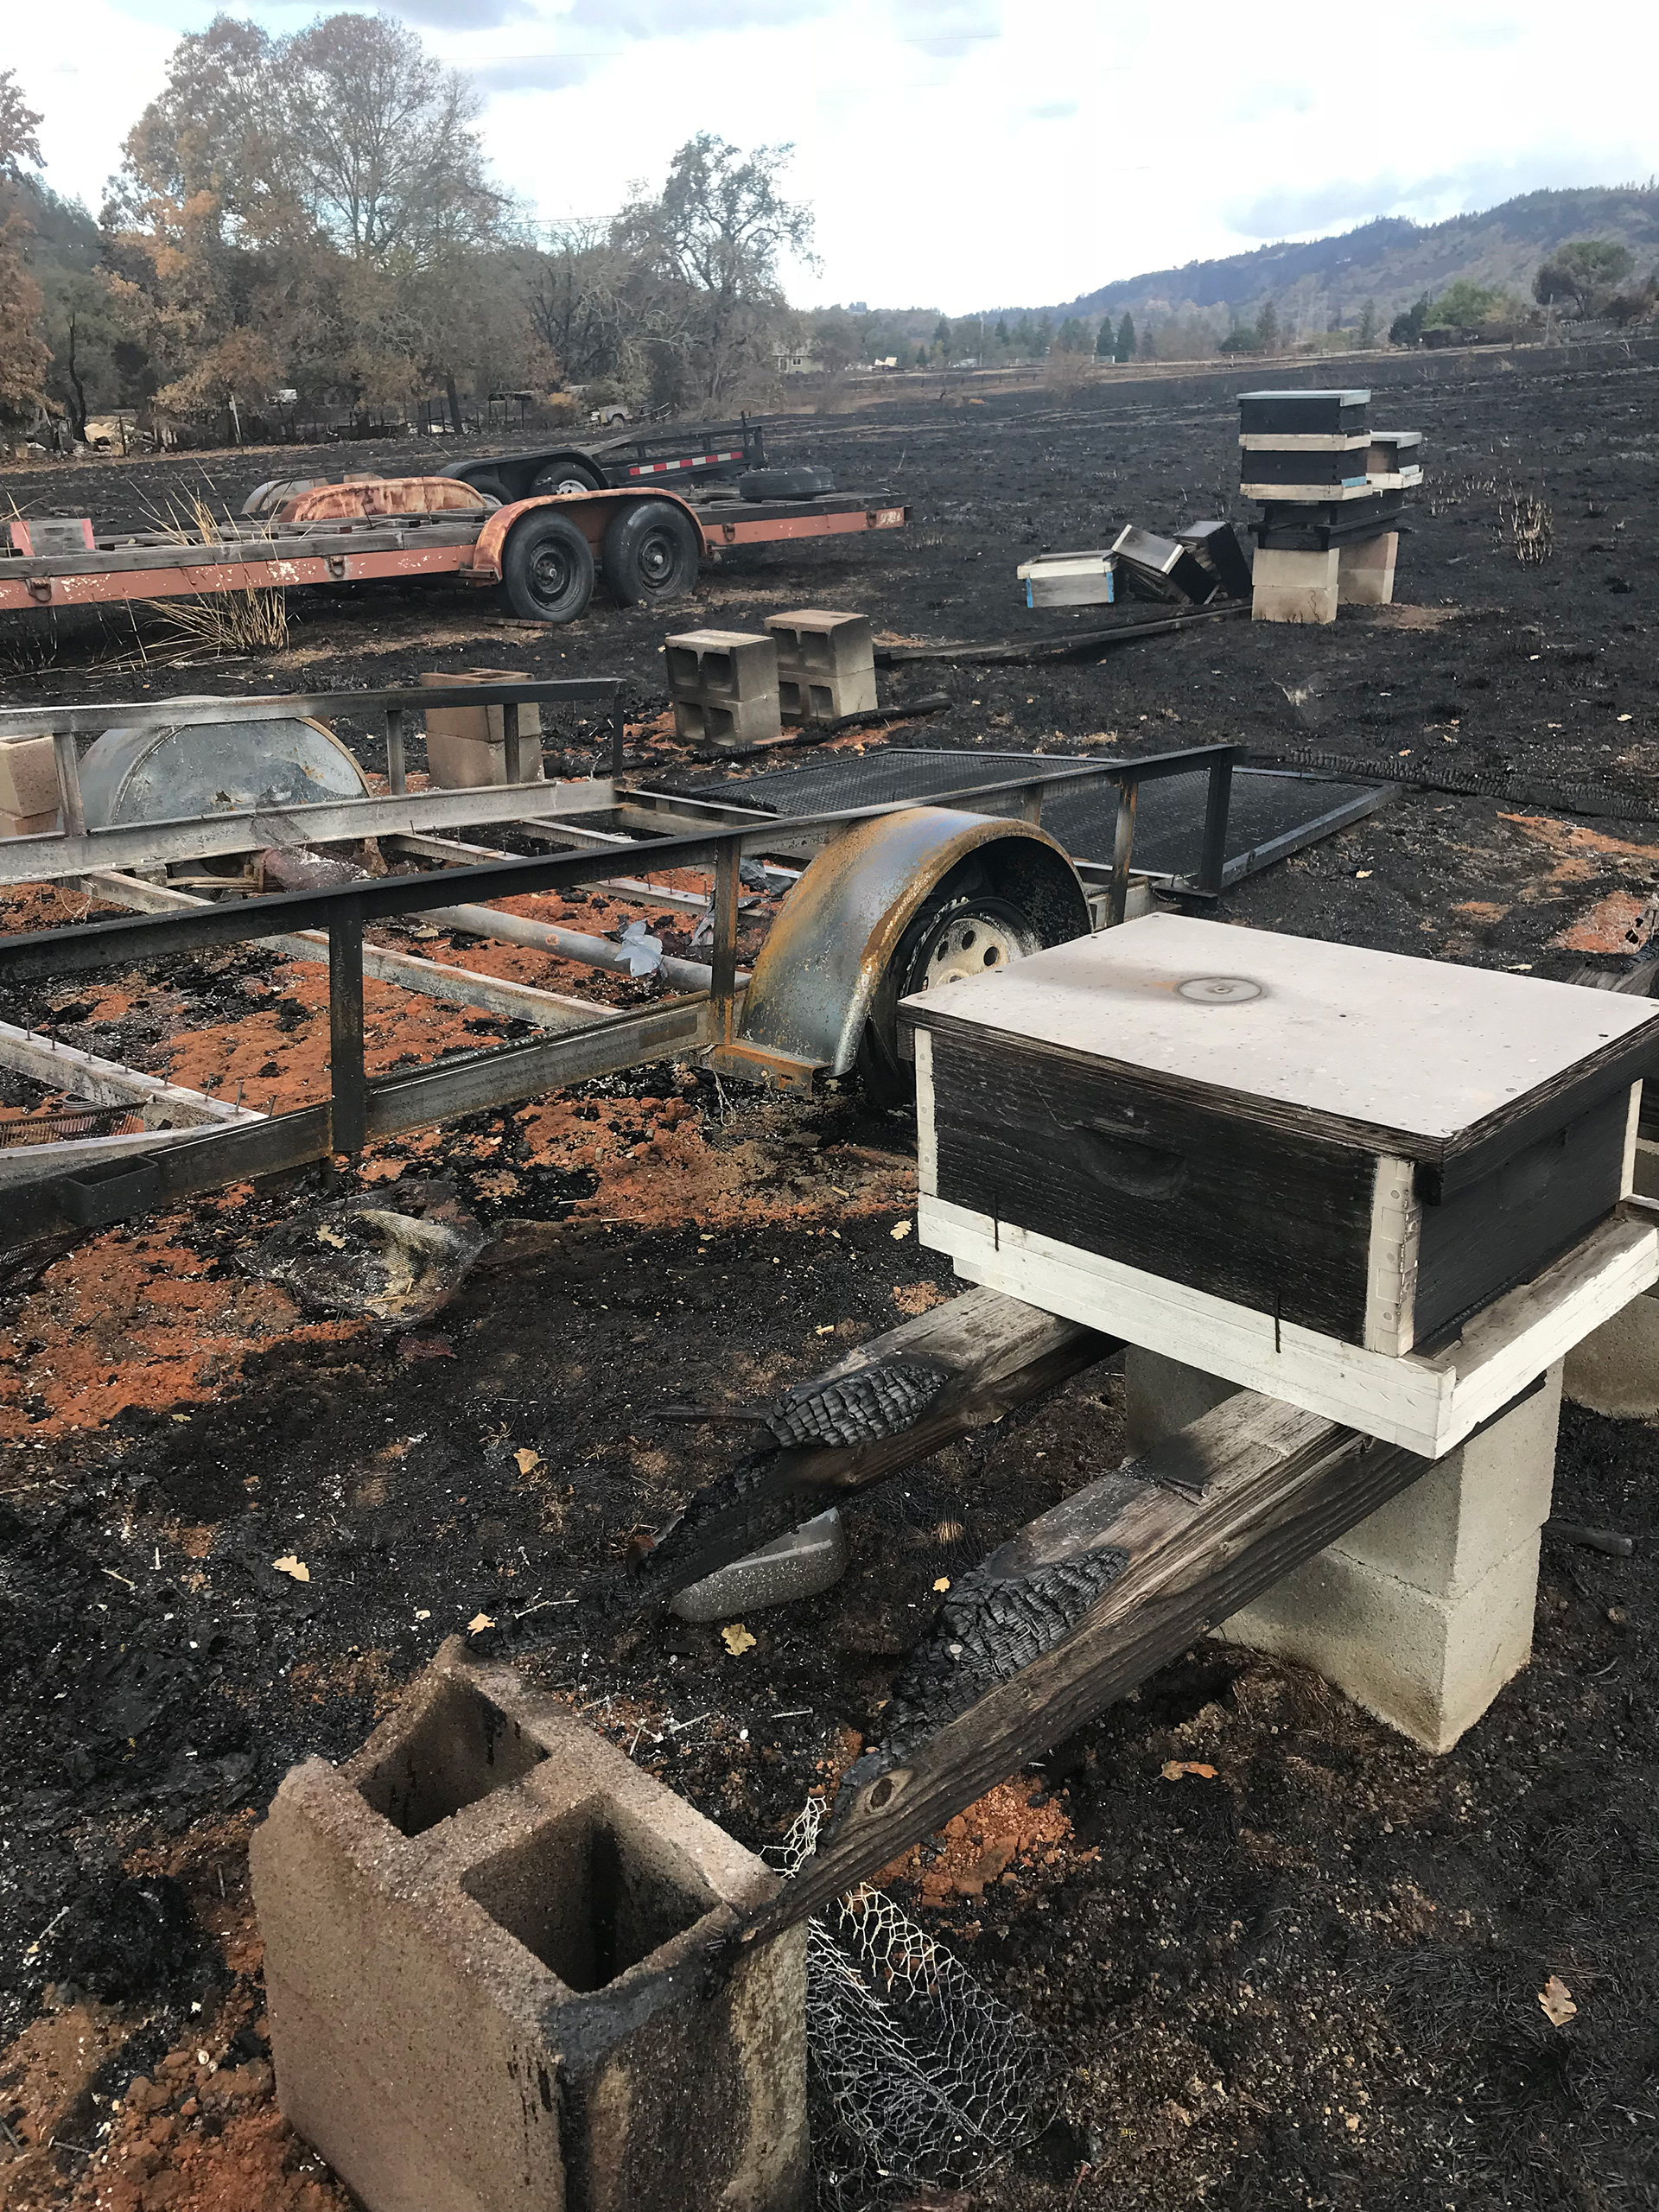 The post-fire remnants of Barker’s “pirate bee ships” on Suzy Fizell’s property in Santa Rosa.